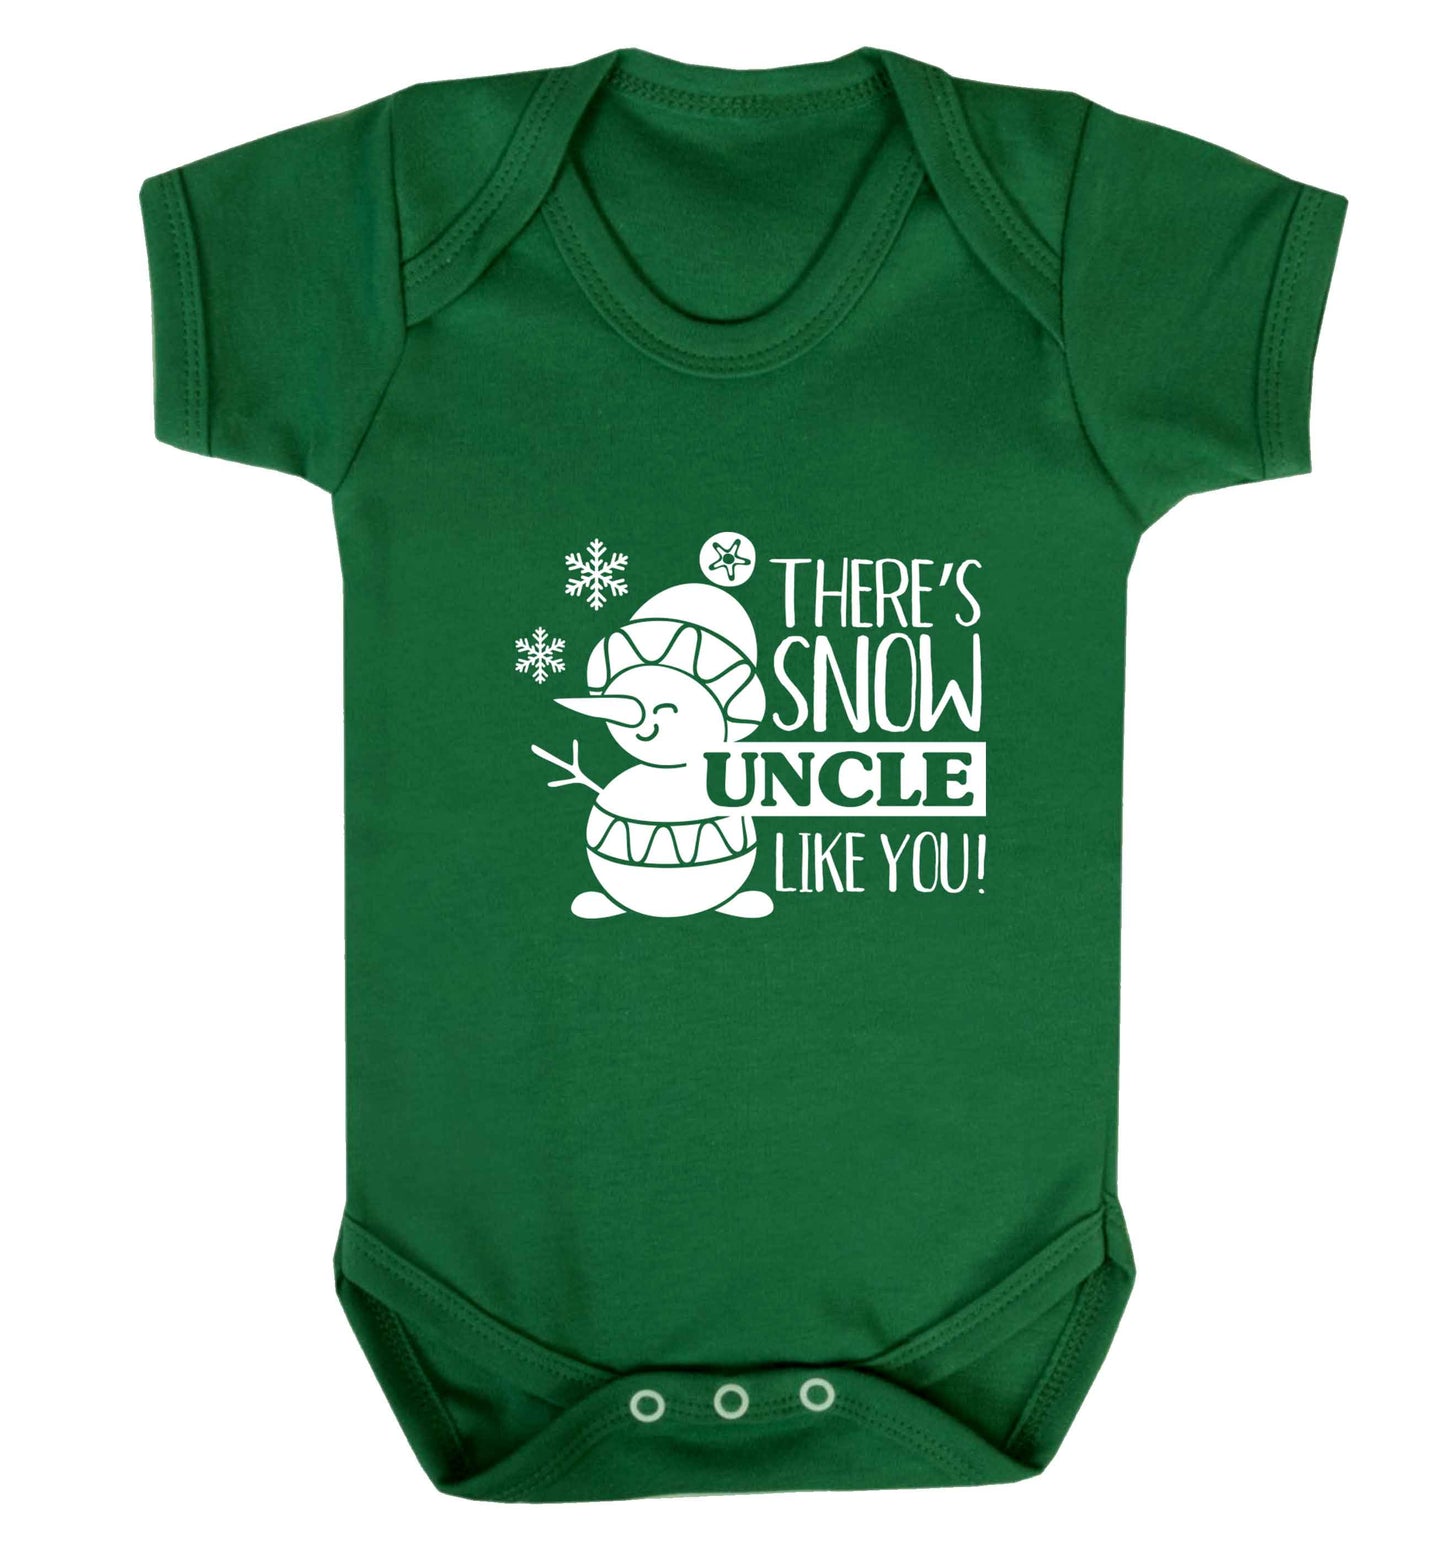 There's snow uncle like you baby vest green 18-24 months